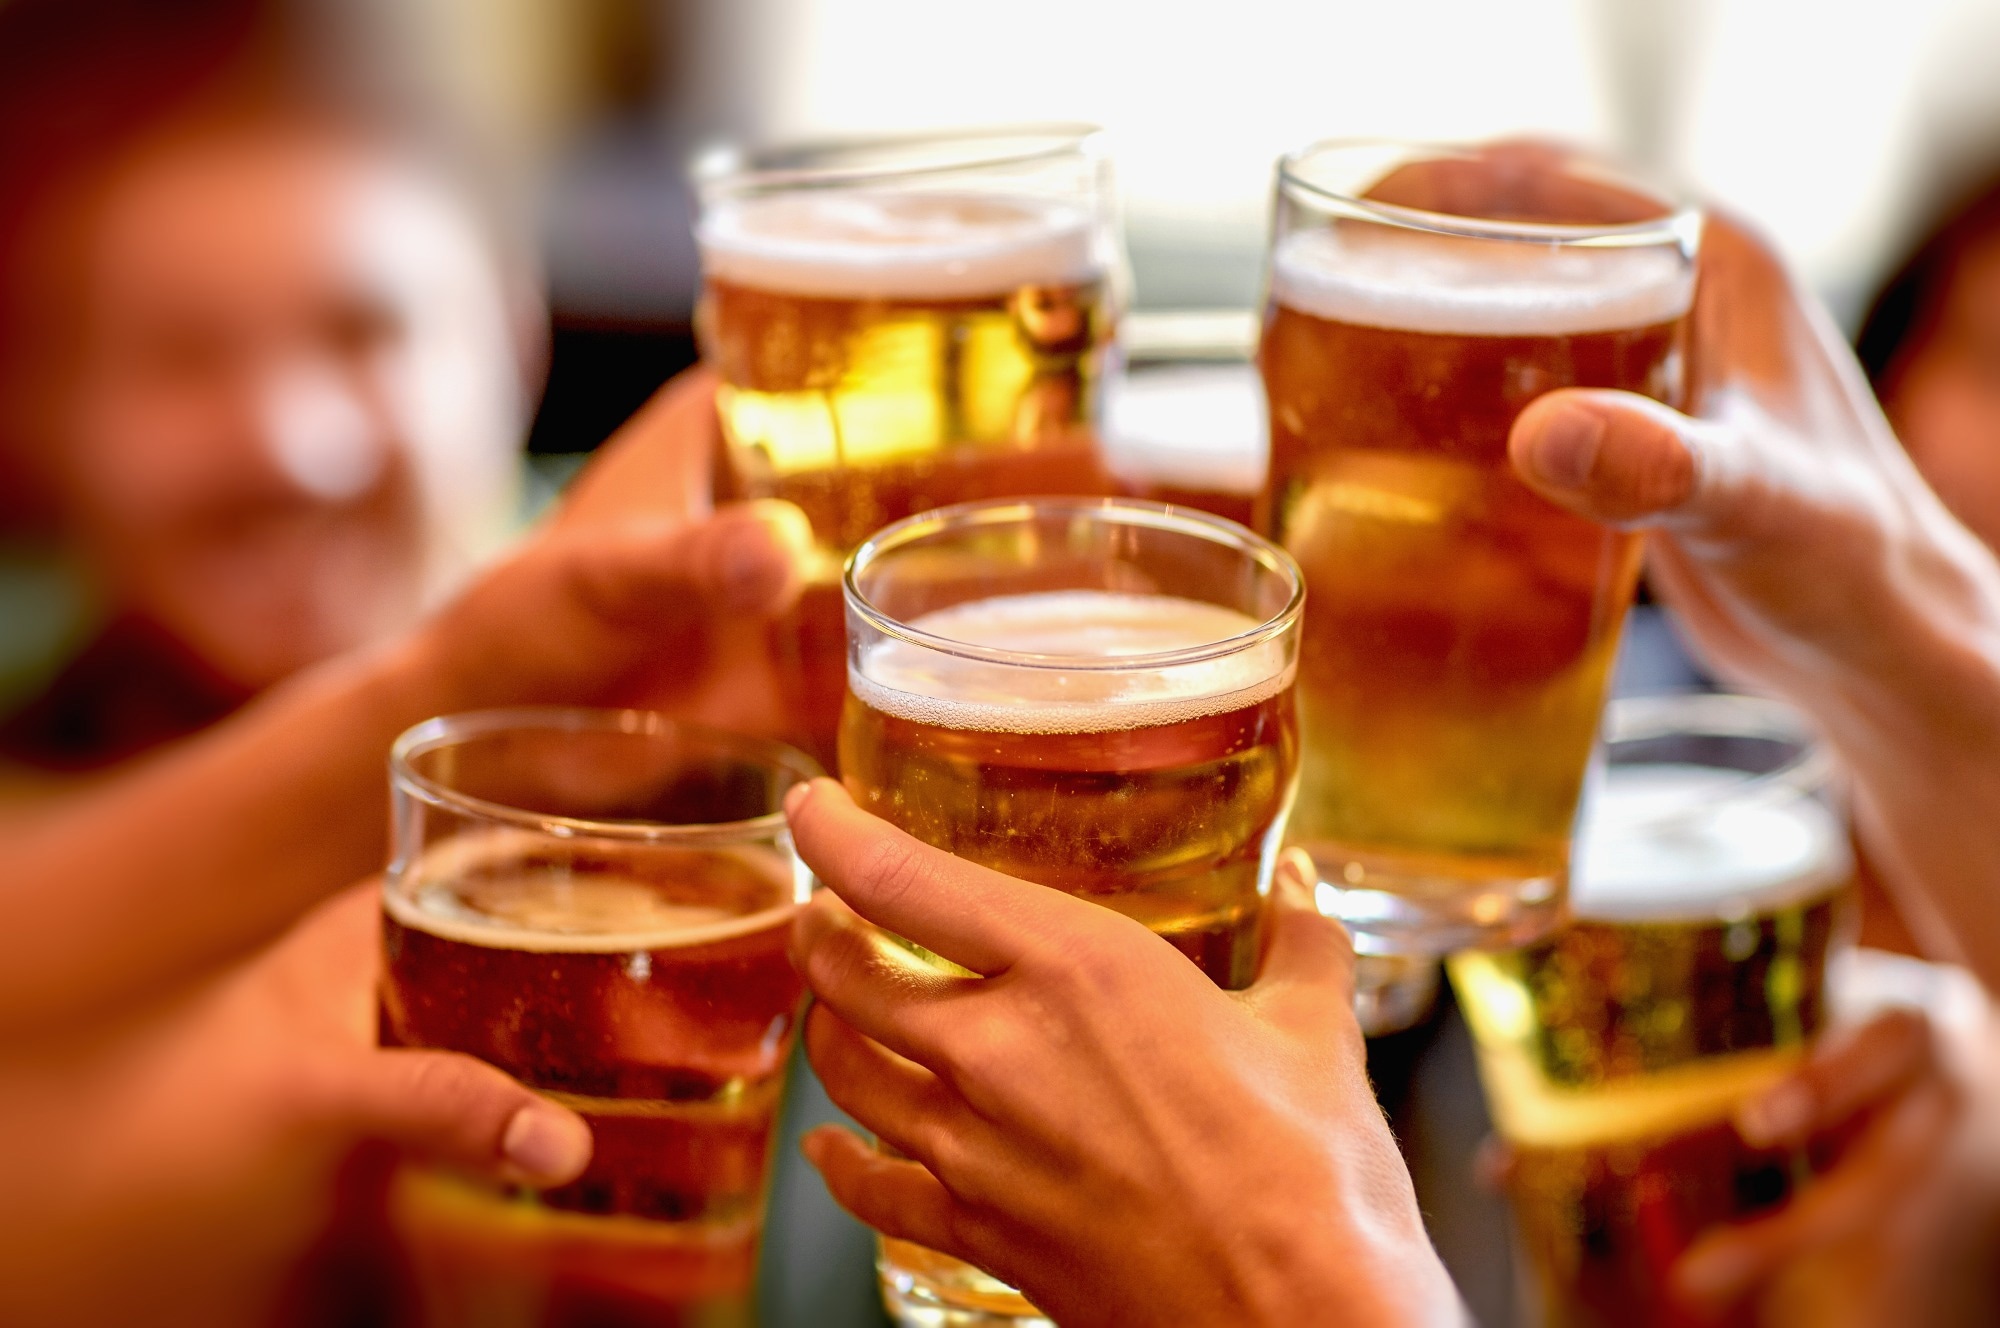 Study: Alcohol consumption and risks of more than 200 diseases in Chinese men. Image Credit: ENZELEN / Shutterstock.com